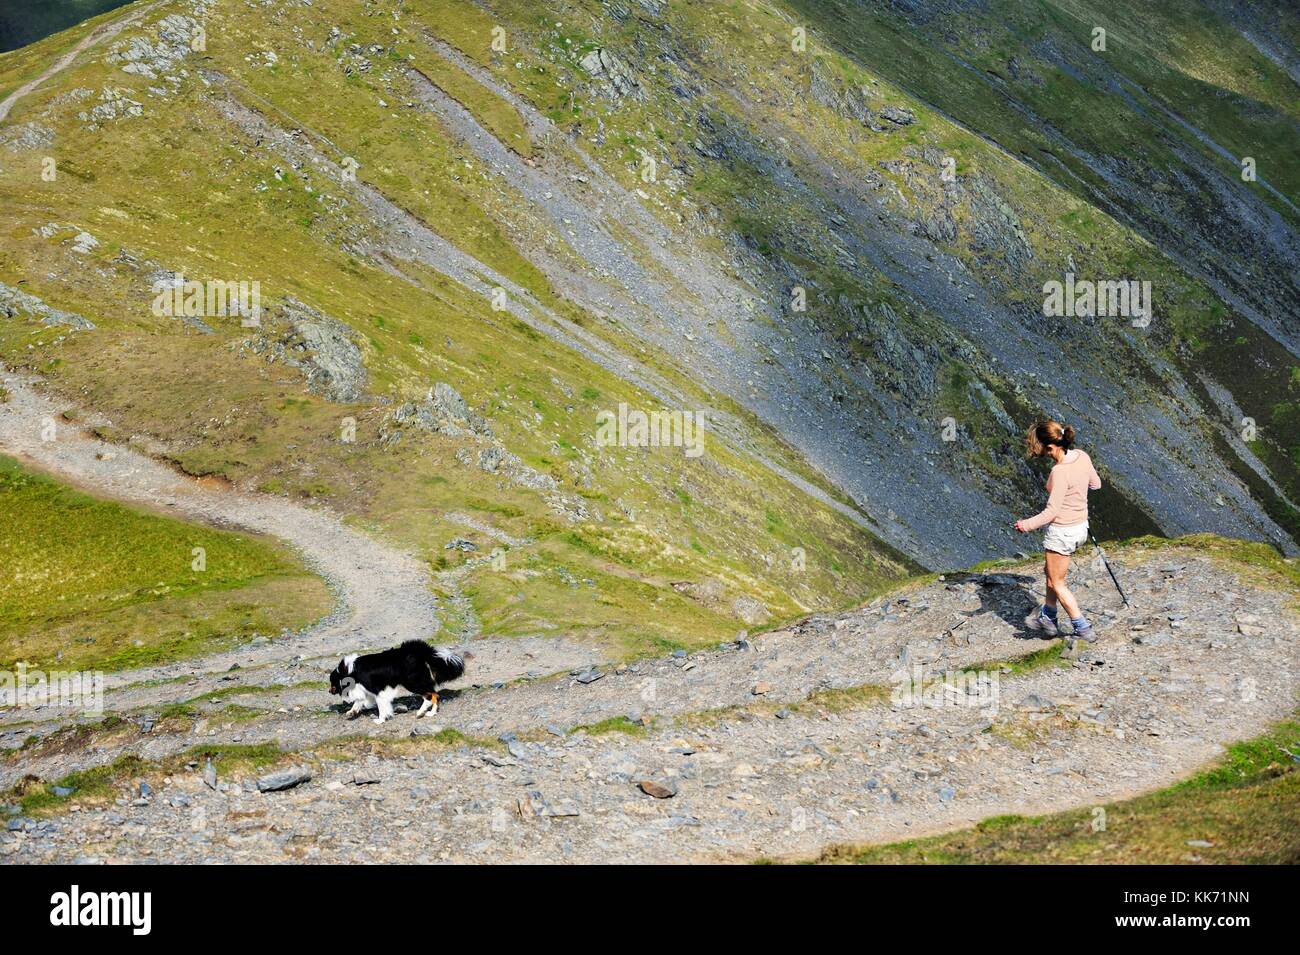 Lake District National Park, Cumbria, England. Woman and border collie dog walking on east flank of Blencathra above Scales Tarn Stock Photo